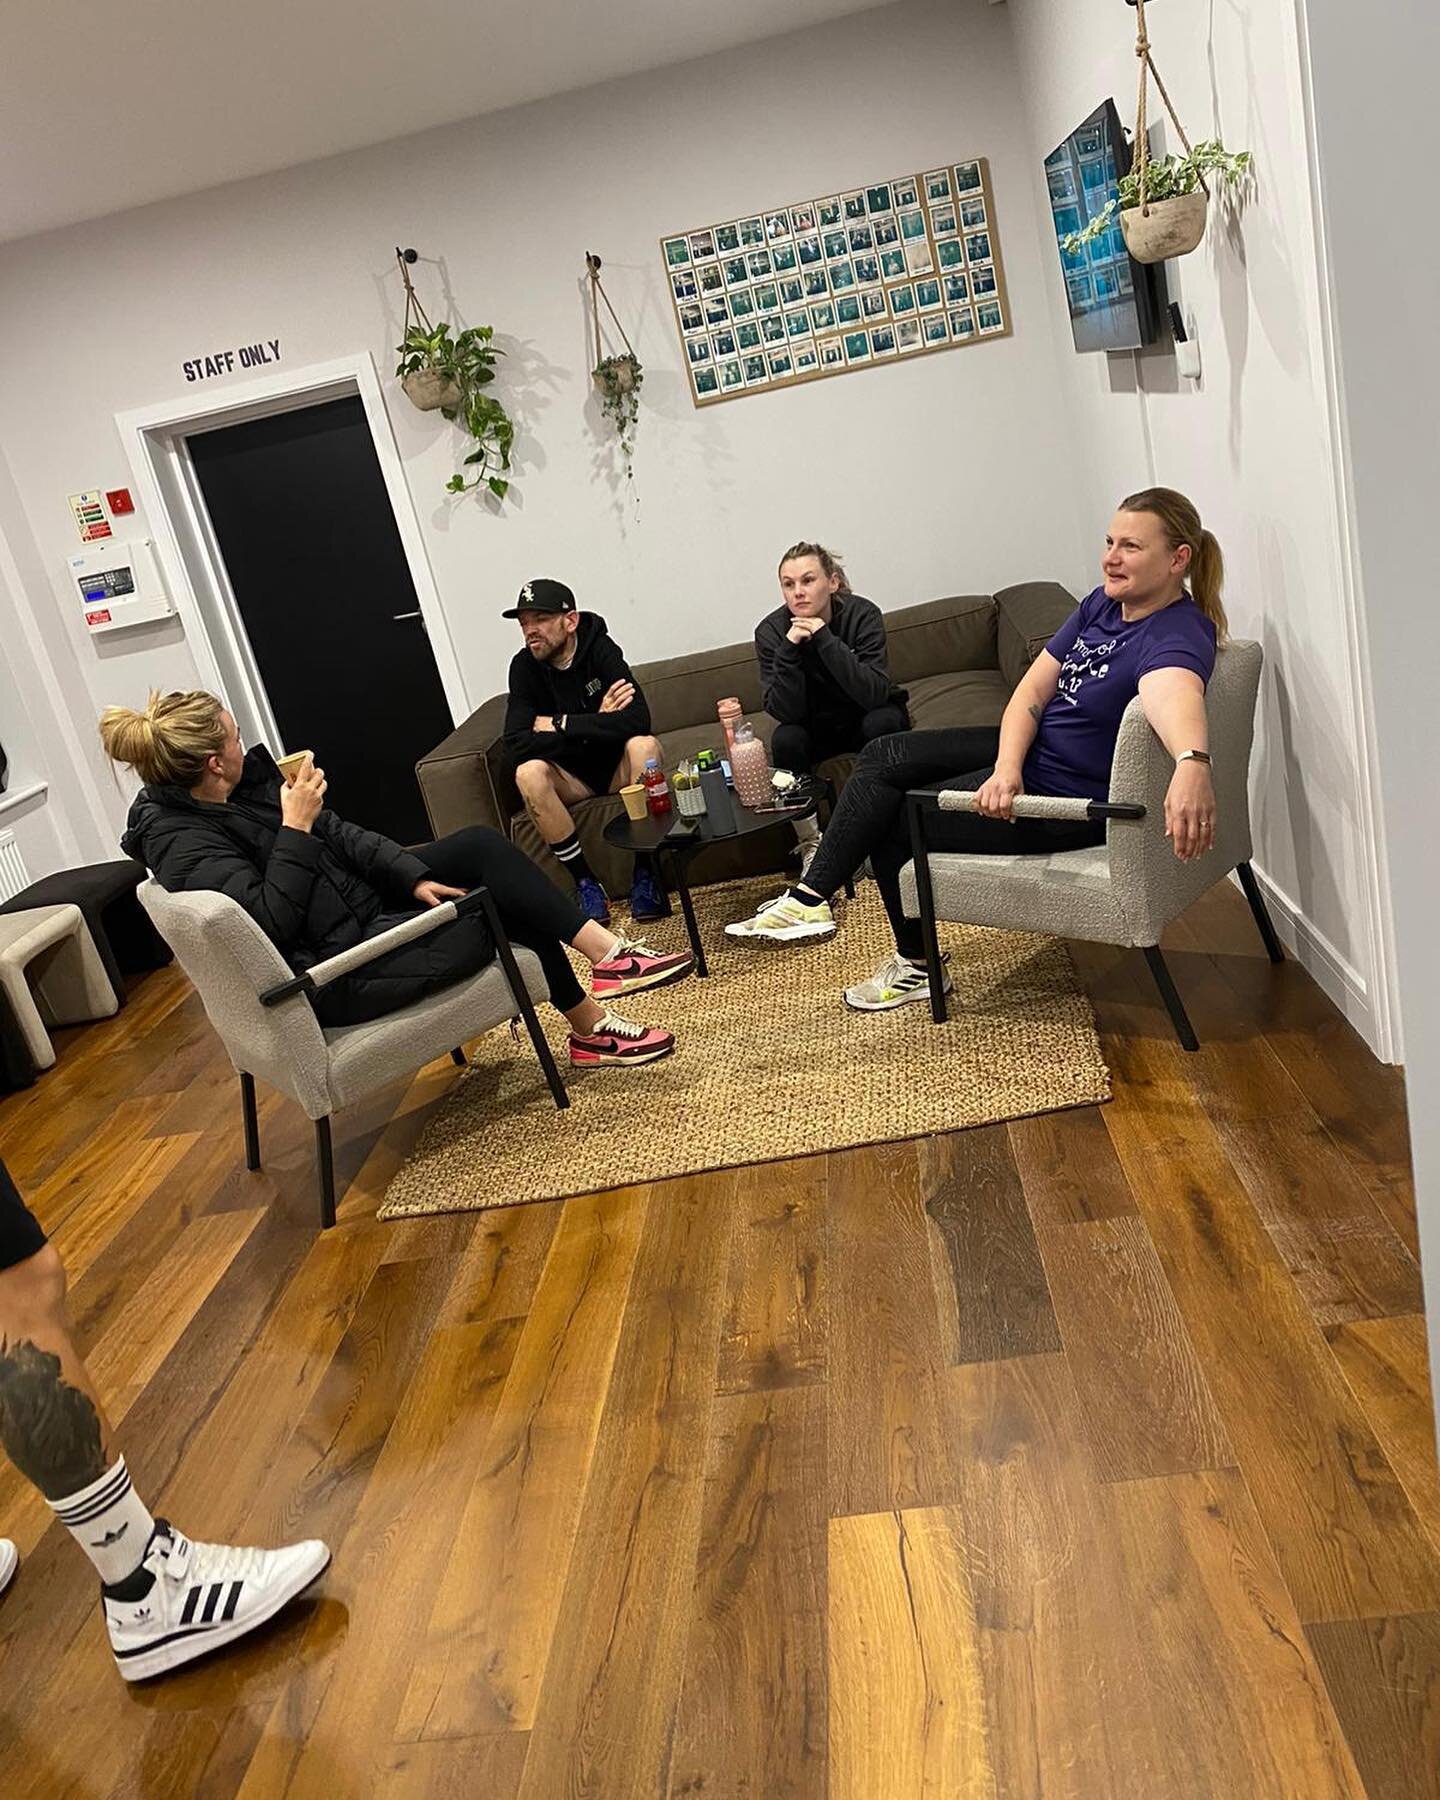 Our new space provides our members with a place to chill out and have a coffee before their workout.

You&rsquo;ll be amazed the motivation you can get from a group vibe, in and out of the gym. Yet sometimes it&rsquo;s just nice to catch up with fell